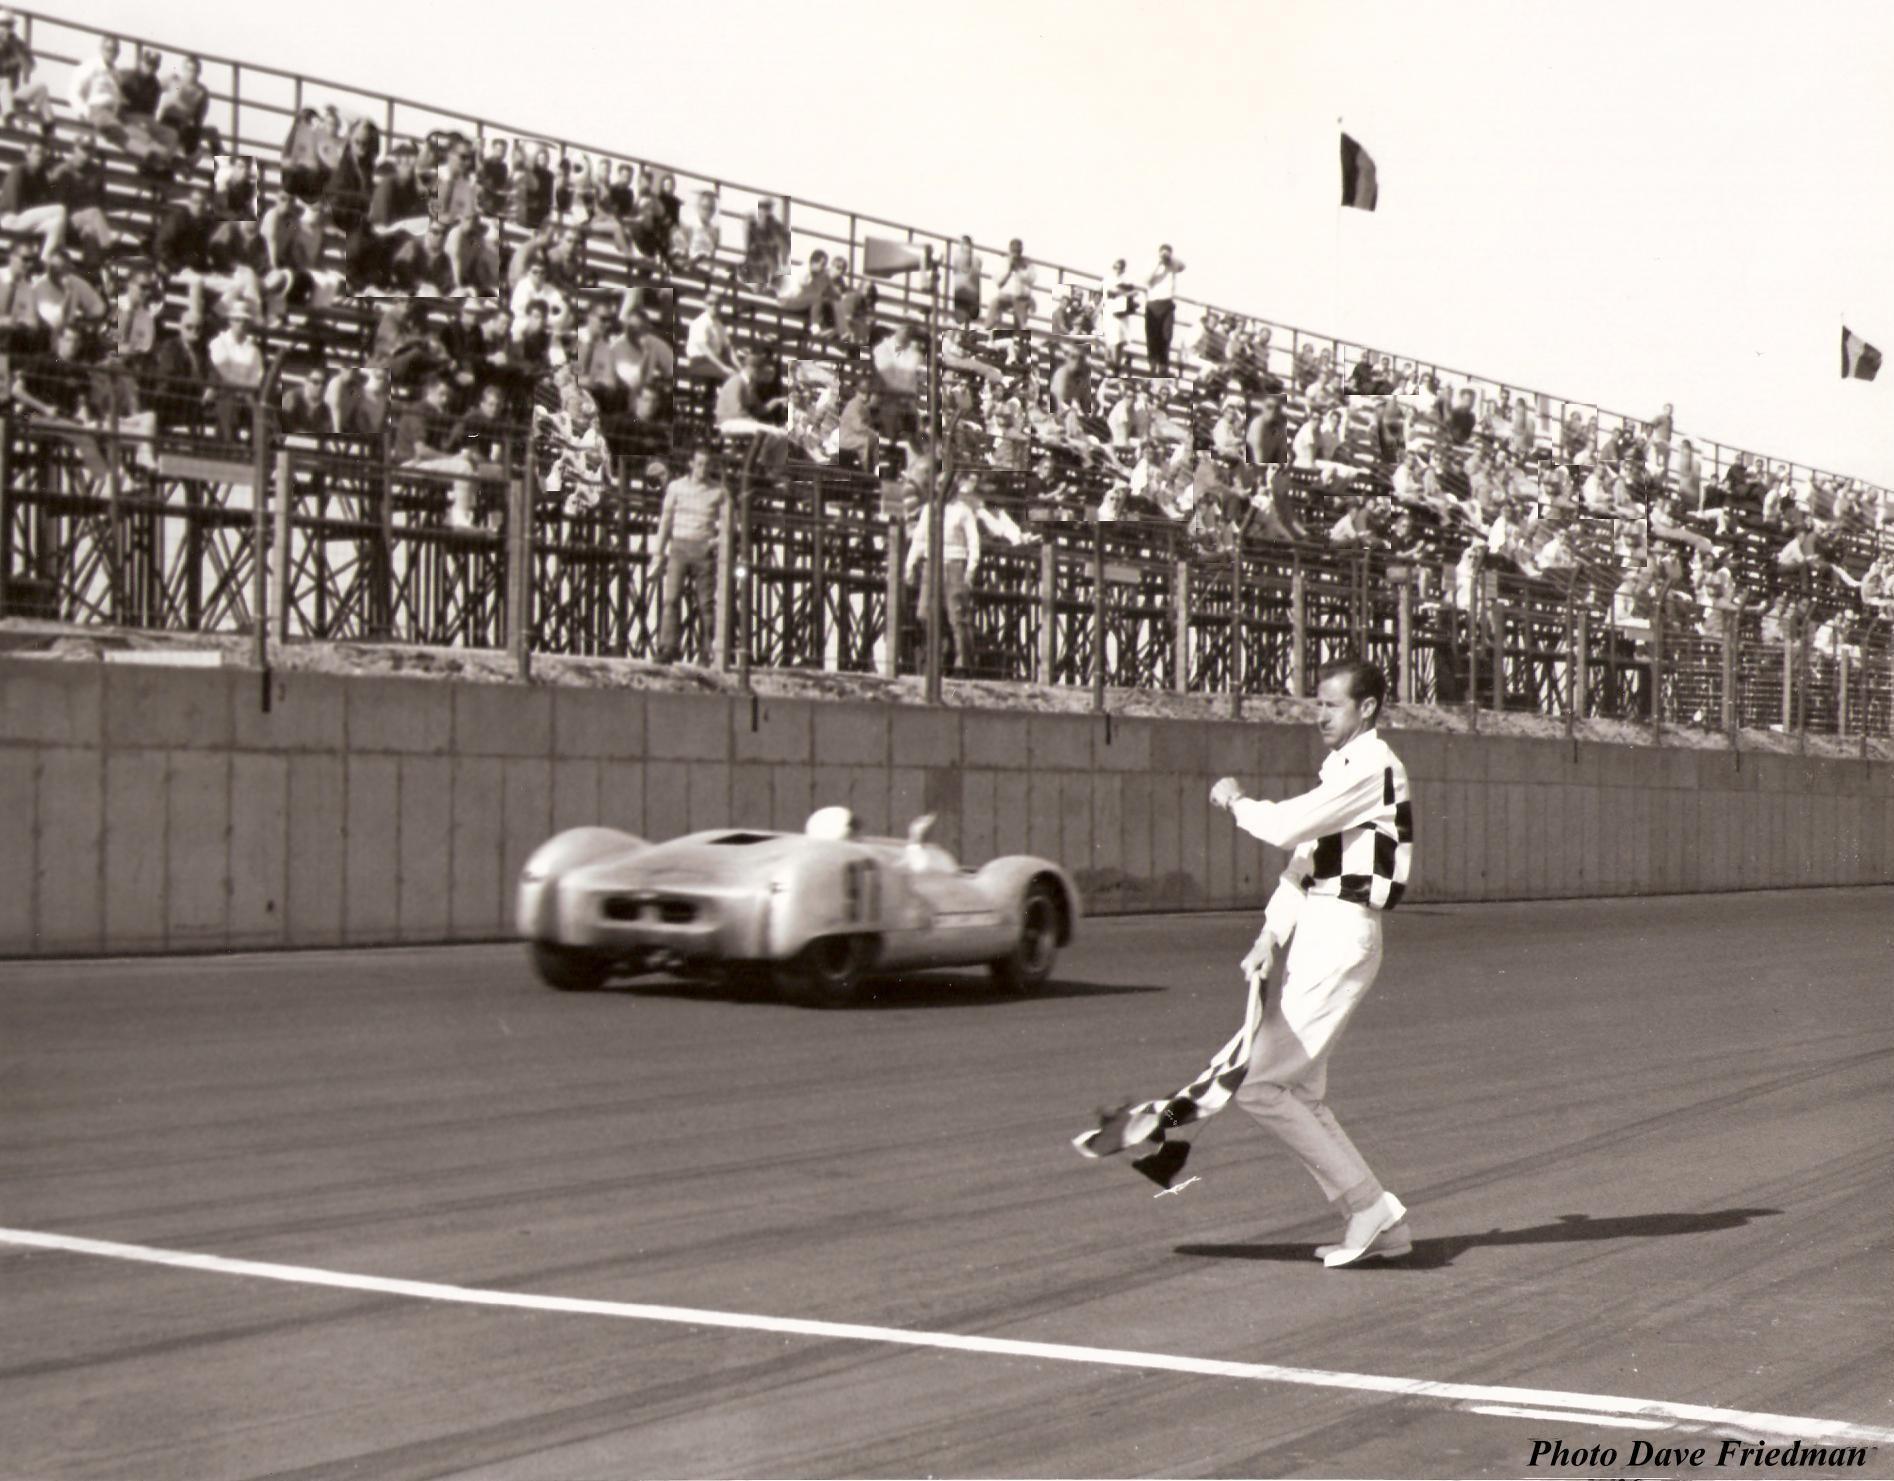 Dave MacDonald scores victory in the Shelby King Cobra Lang-Cooper at Phoenix